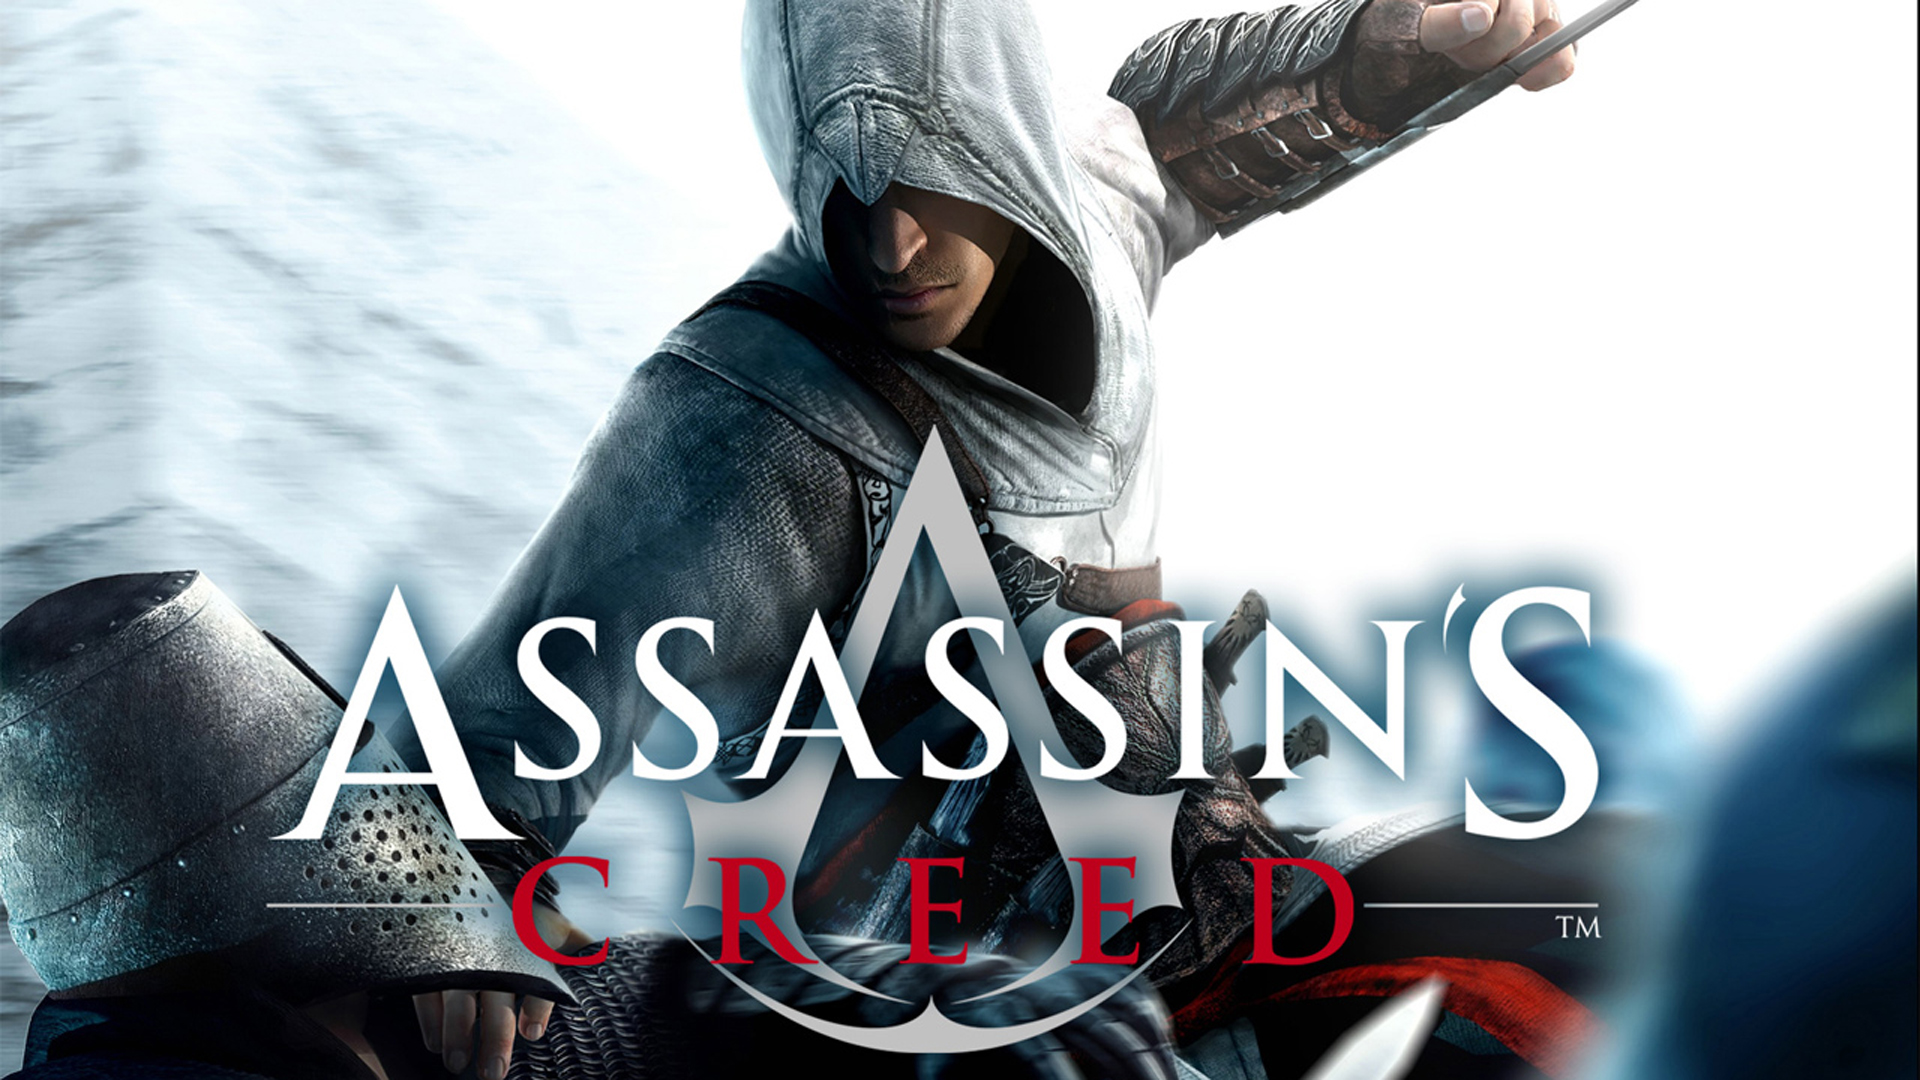 assassin's creed, video game, altair (assassin's creed)